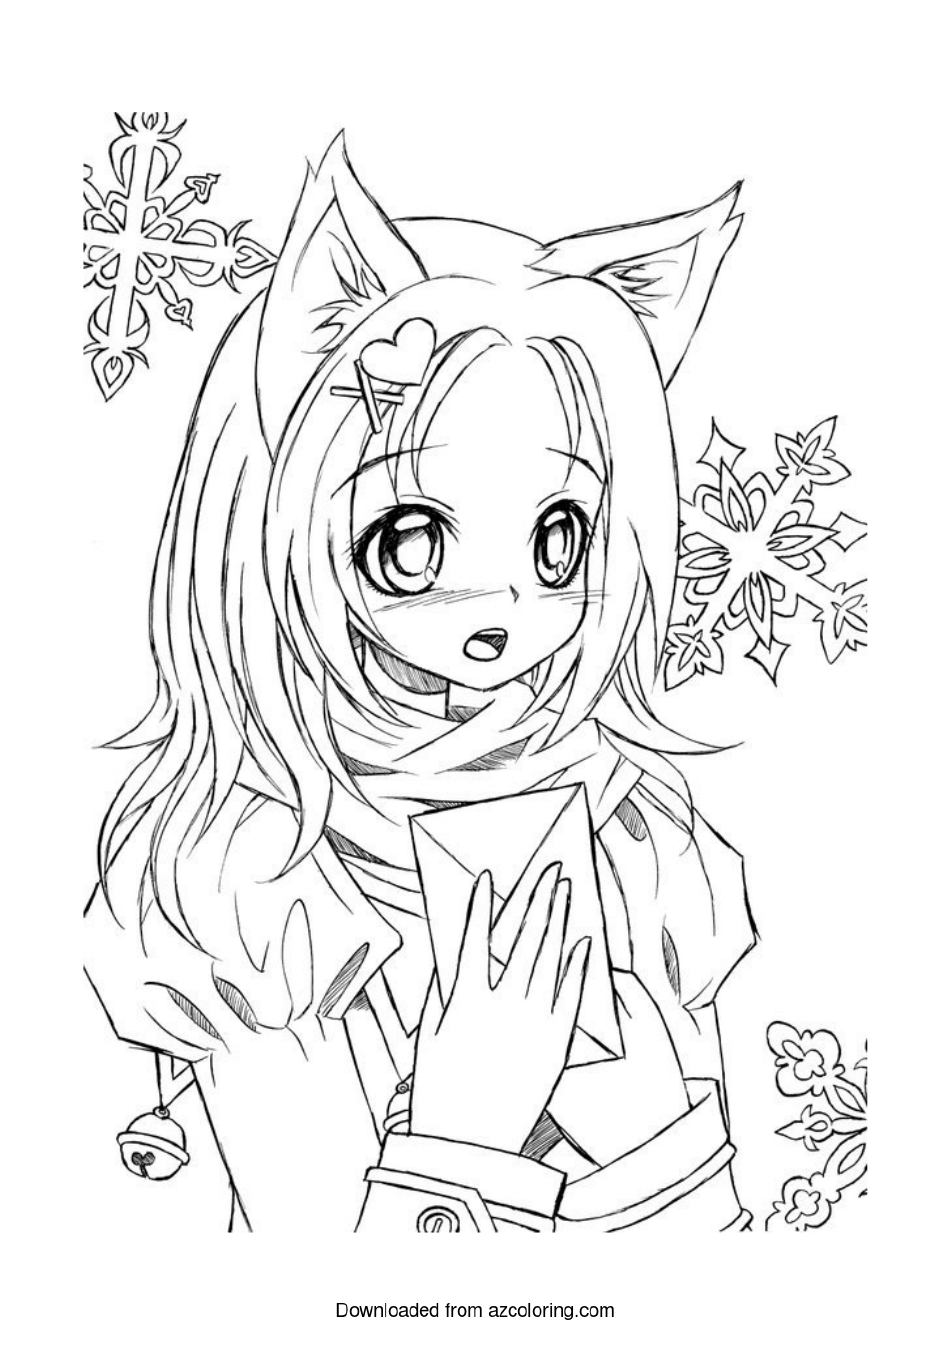 Anime Coloring Page Praying Child · Creative Fabrica